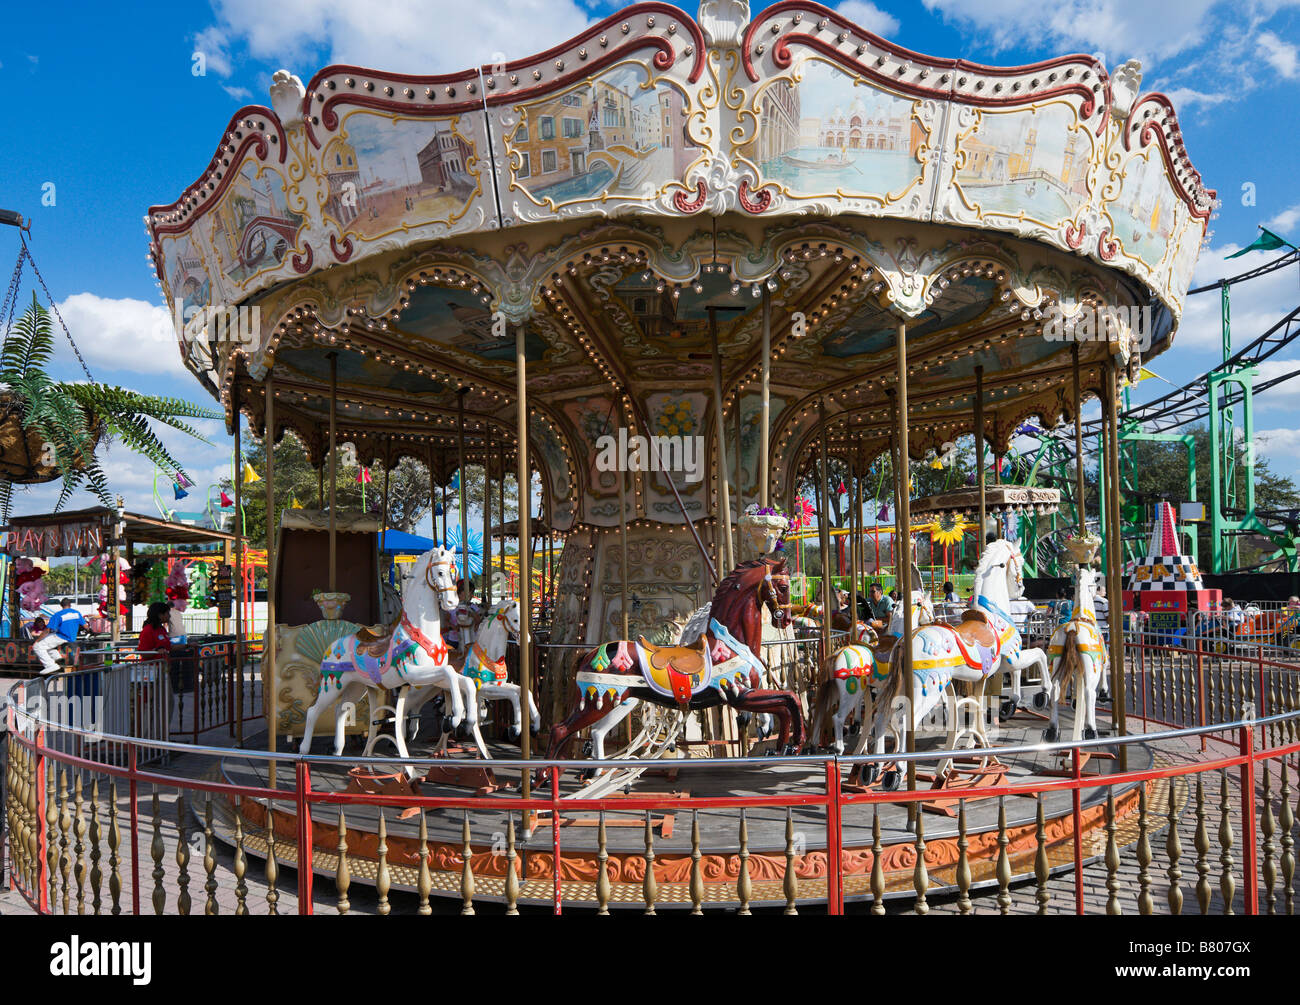 Carousel in Old Town Kissimmee on US 192, Kissimmee, Orlando, Central Florida, USA Stock Photo